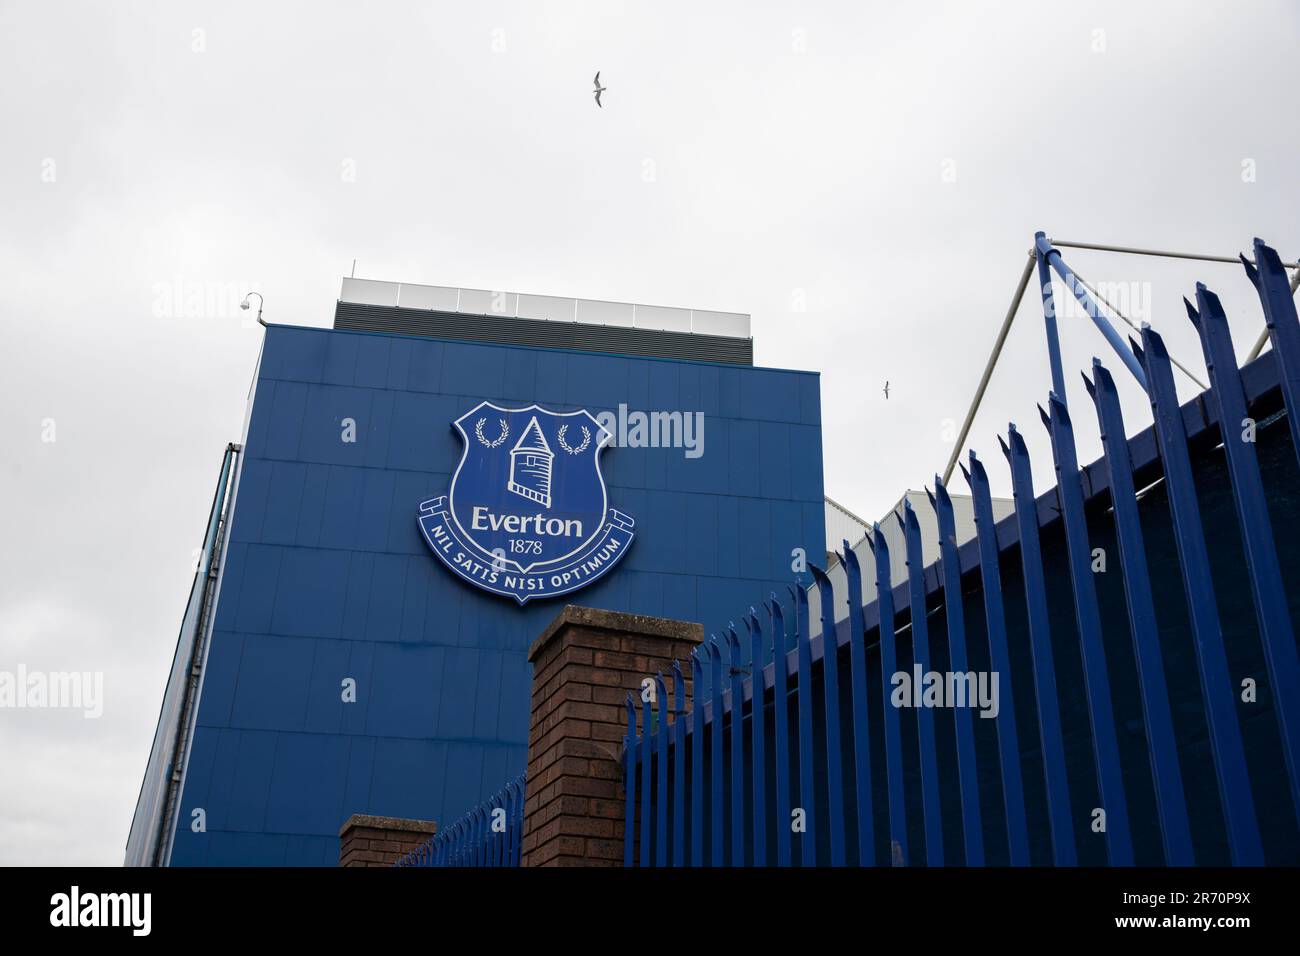 Everton FC's club badge / crest, on the side of their Goodison Park stadium, Liverpool. Stock Photo